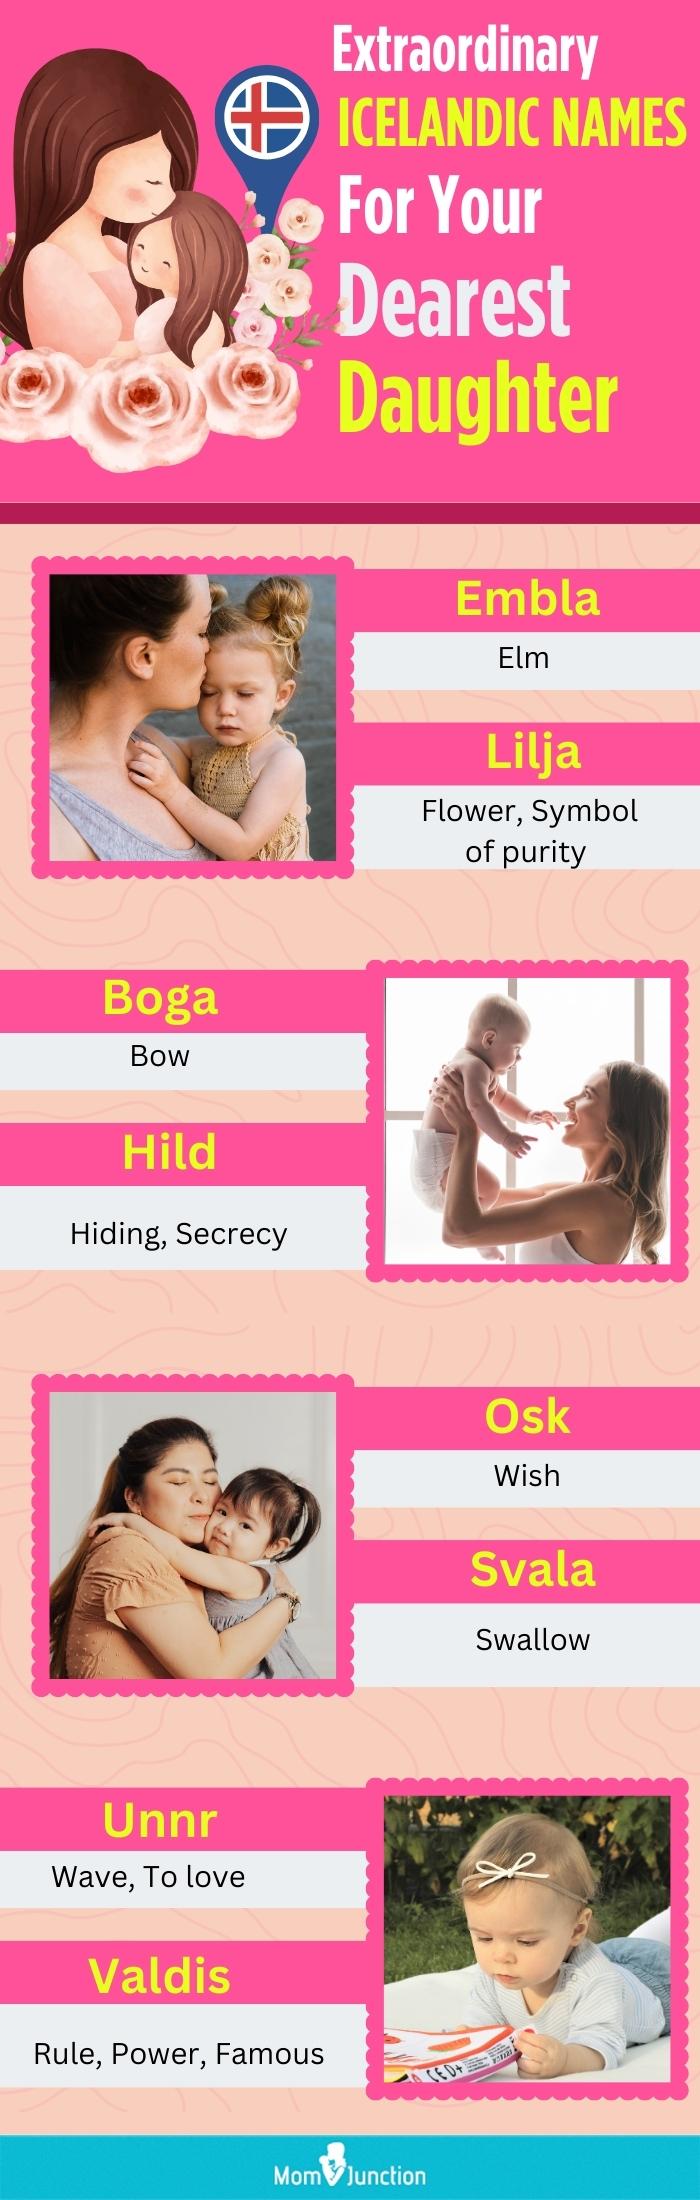 extraordinary icelandic names for your dearest daughter (infographic)